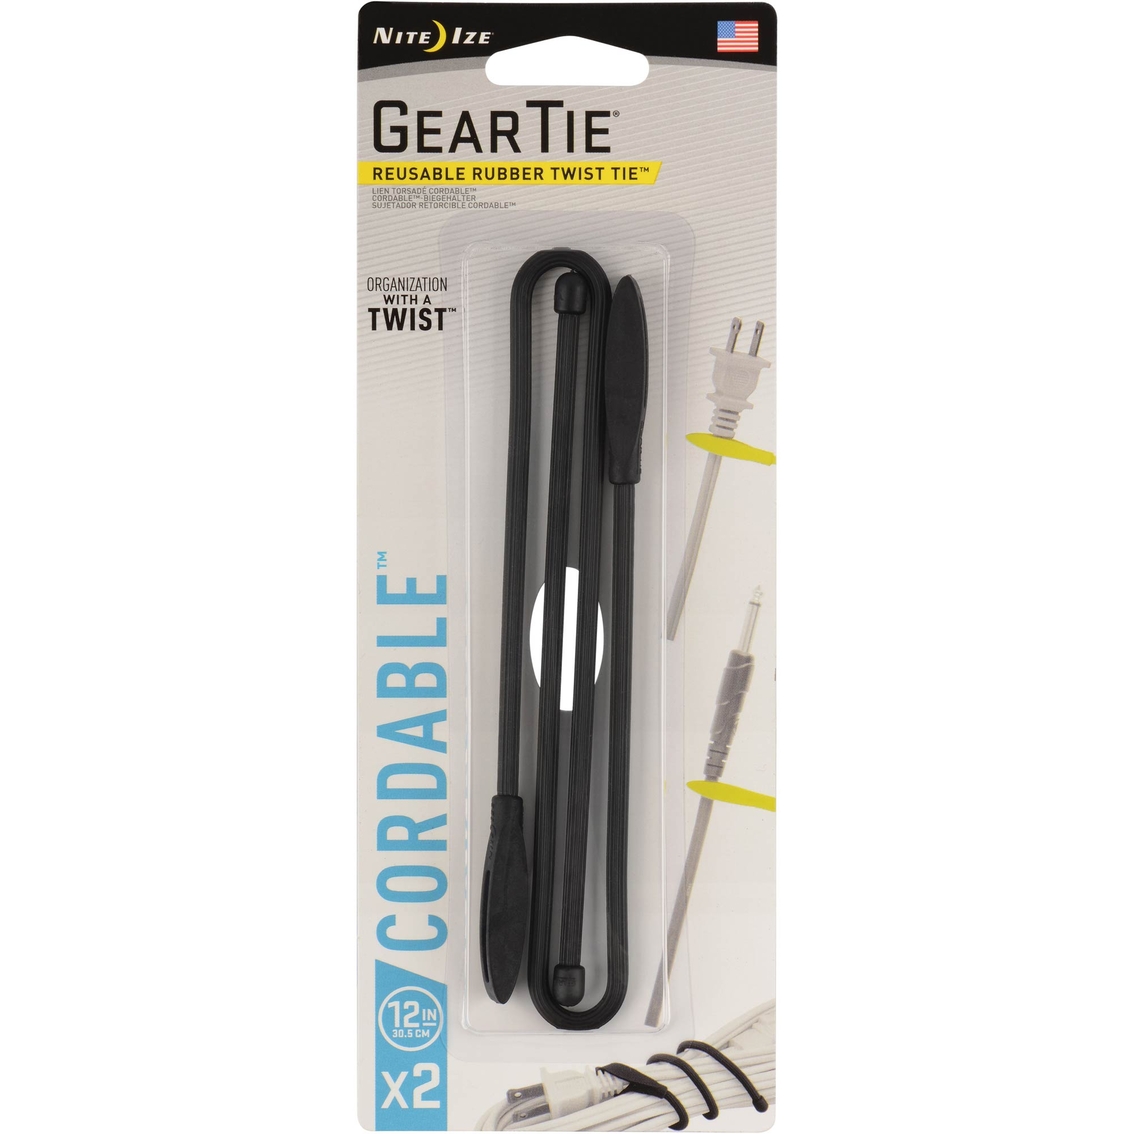 Nite Ize Gear Tie Cordable 12 in. 2 Pk. - Image 4 of 4